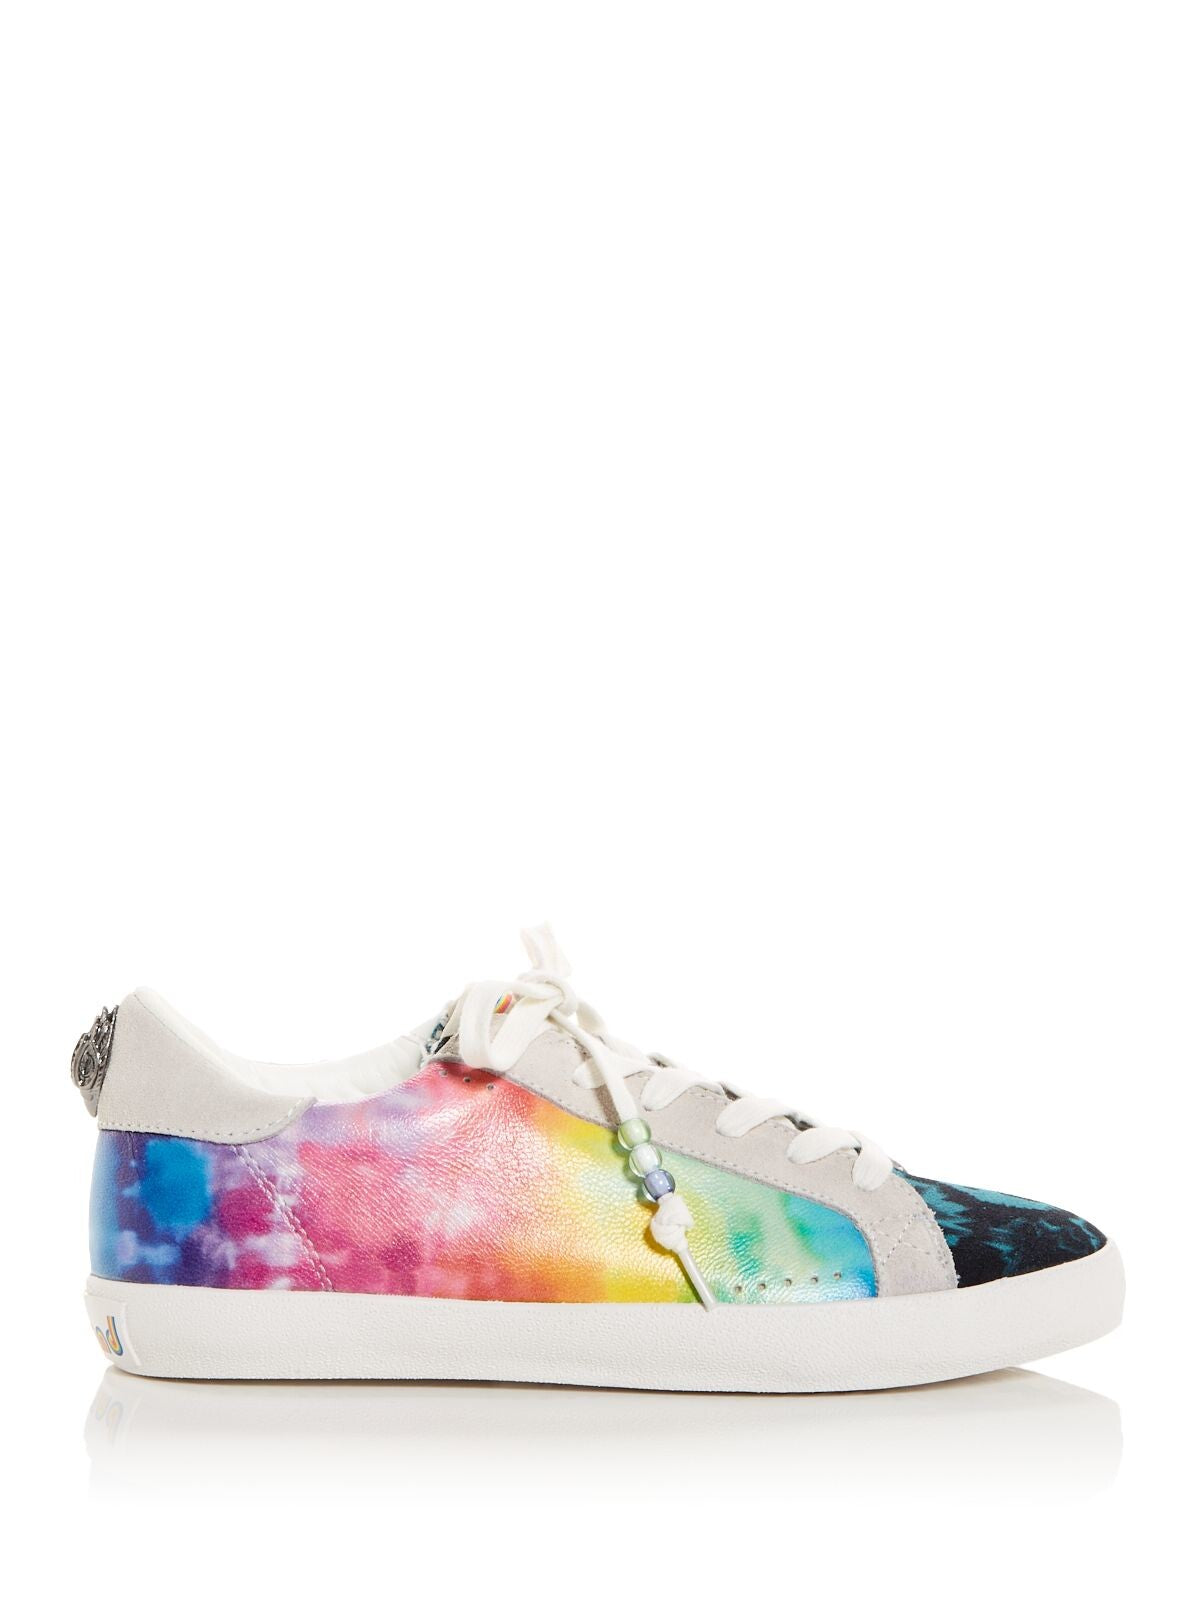 KURT GEIGER Womens Gray Tie Dye Embellished Removable Insole Lexi Round Toe Platform Lace-Up Athletic Sneakers Shoes 36.5